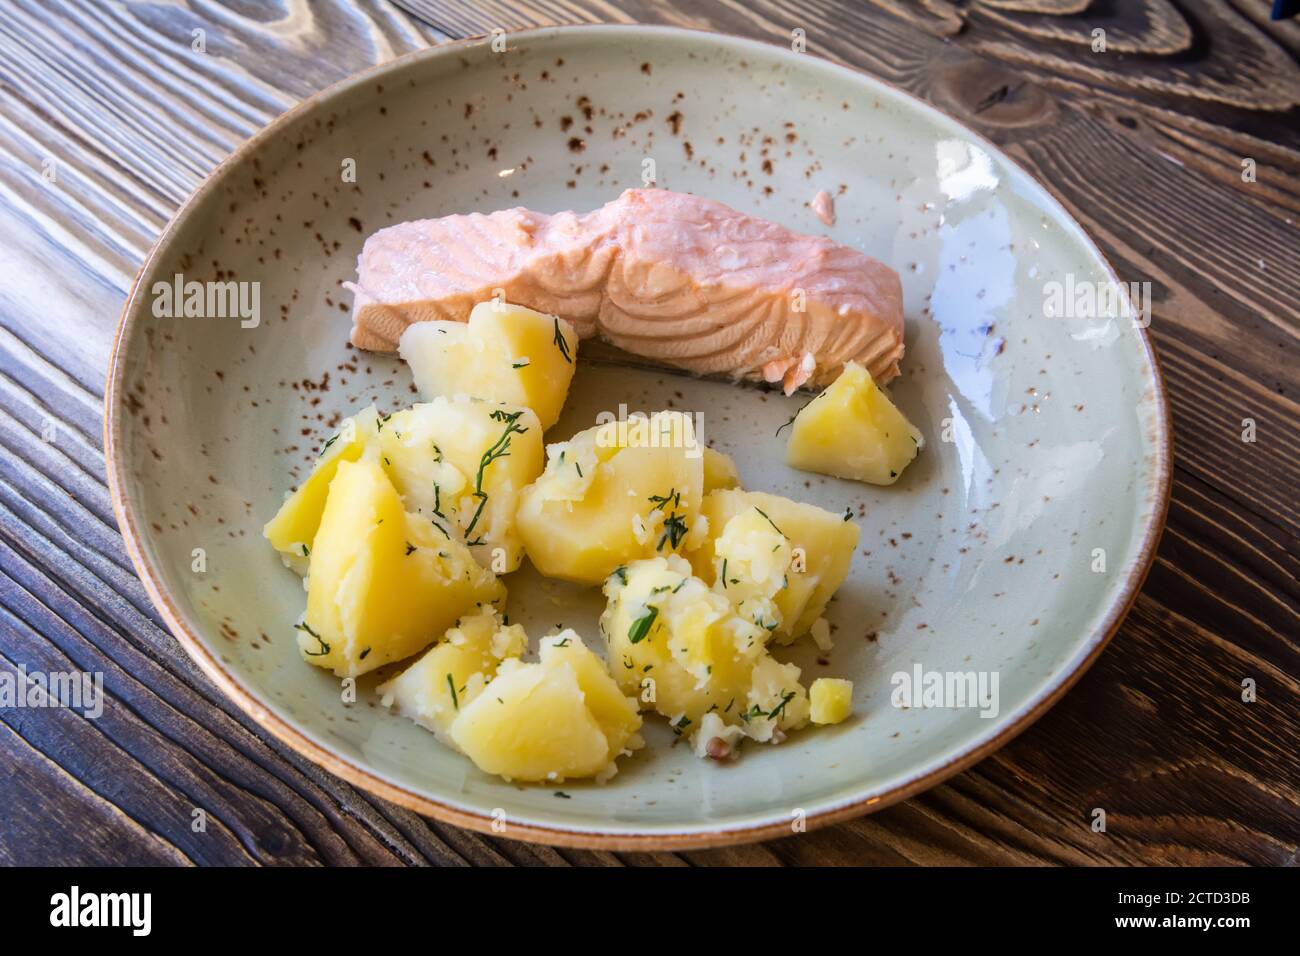 Plate of salmon with boiled potatoes, in Saint Petersburg, Russia. Stock Photo